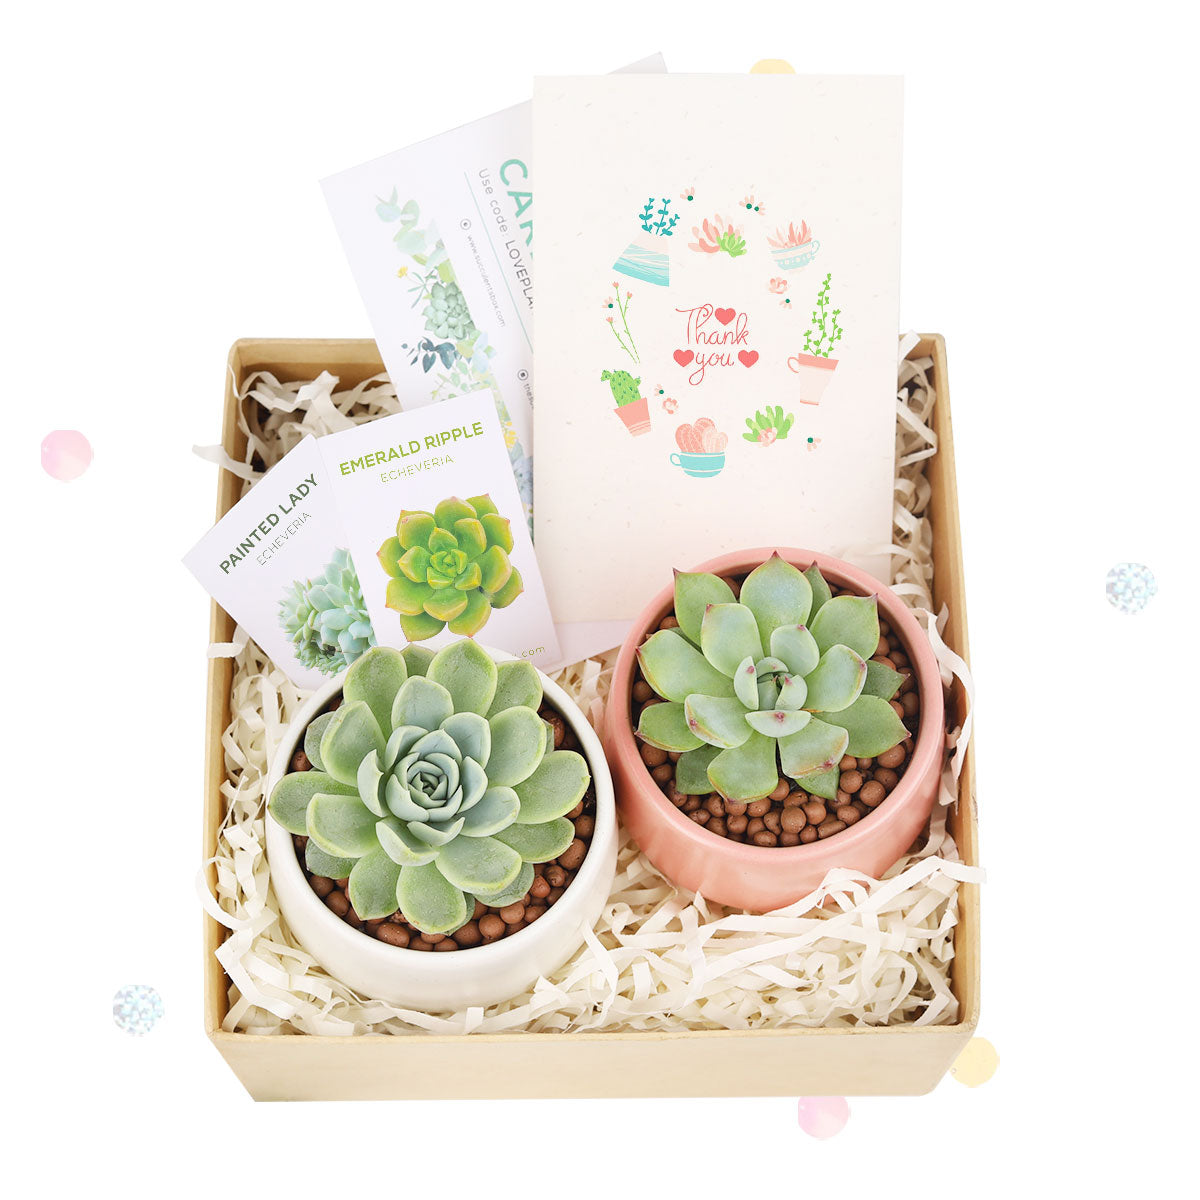 EcoFriendly Succulent Gift Box for Employee, Corporate Gift Succulents For Sale Online, Succulent Thank You Gift Ideas, Thank you gift for your staff in 2022, Customizable Gift Boxes for employees and clients, Office gift for employees, Employee appreciation day 2022 ideas, Succulent Plants for Clients & Employees for sale